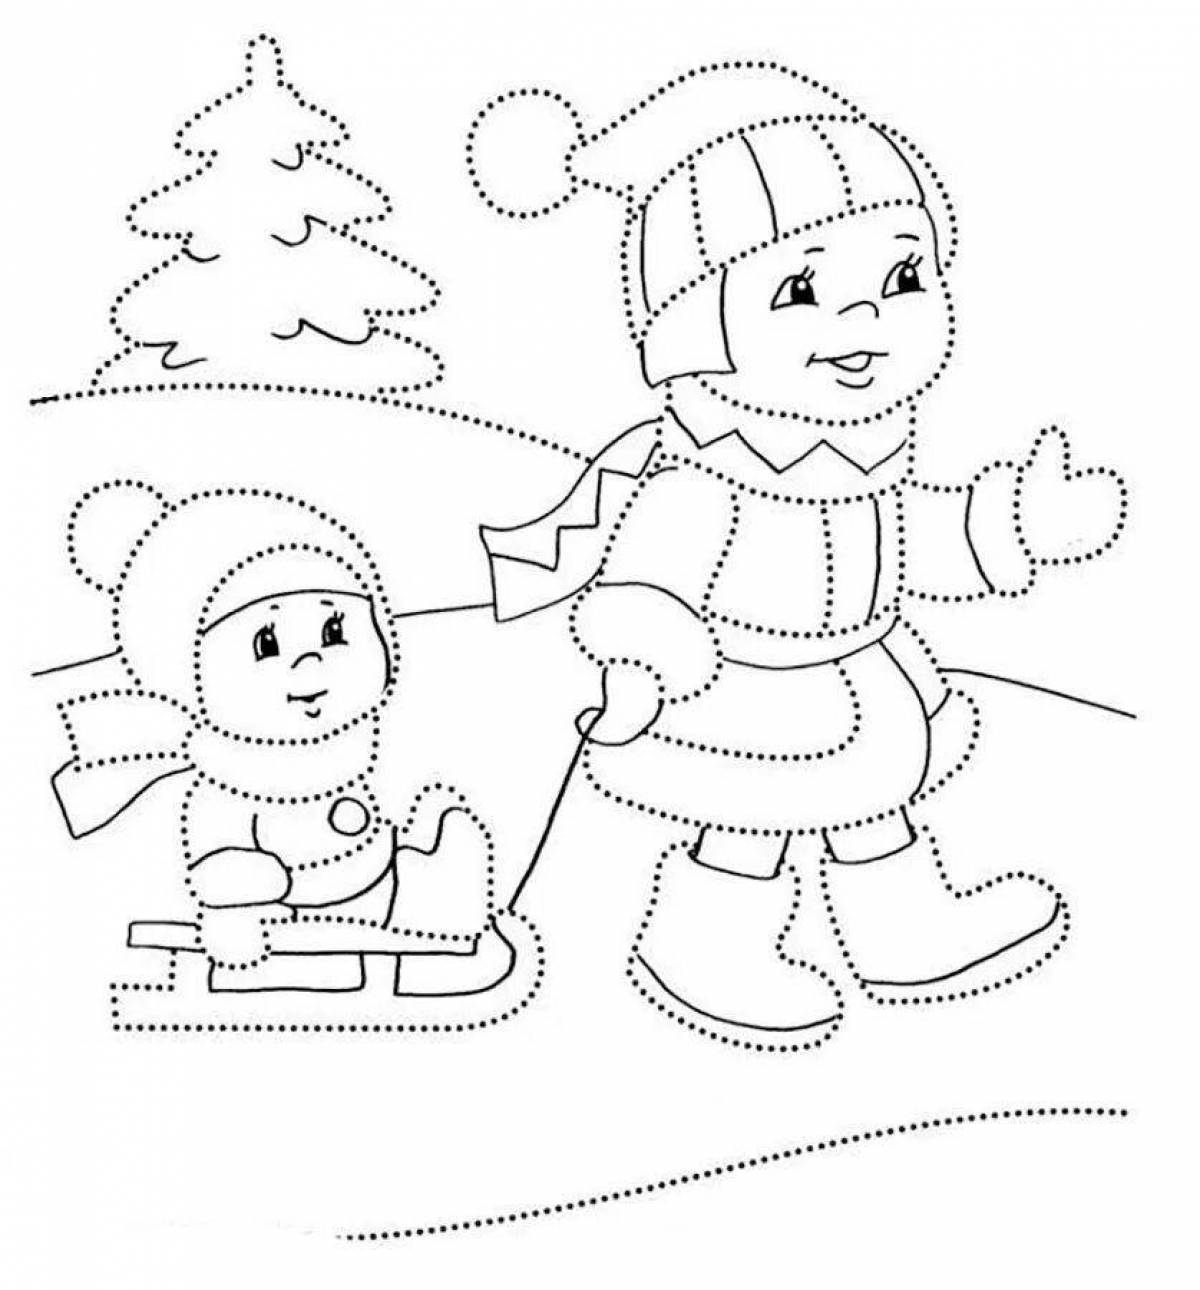 Exquisite winter walk coloring page